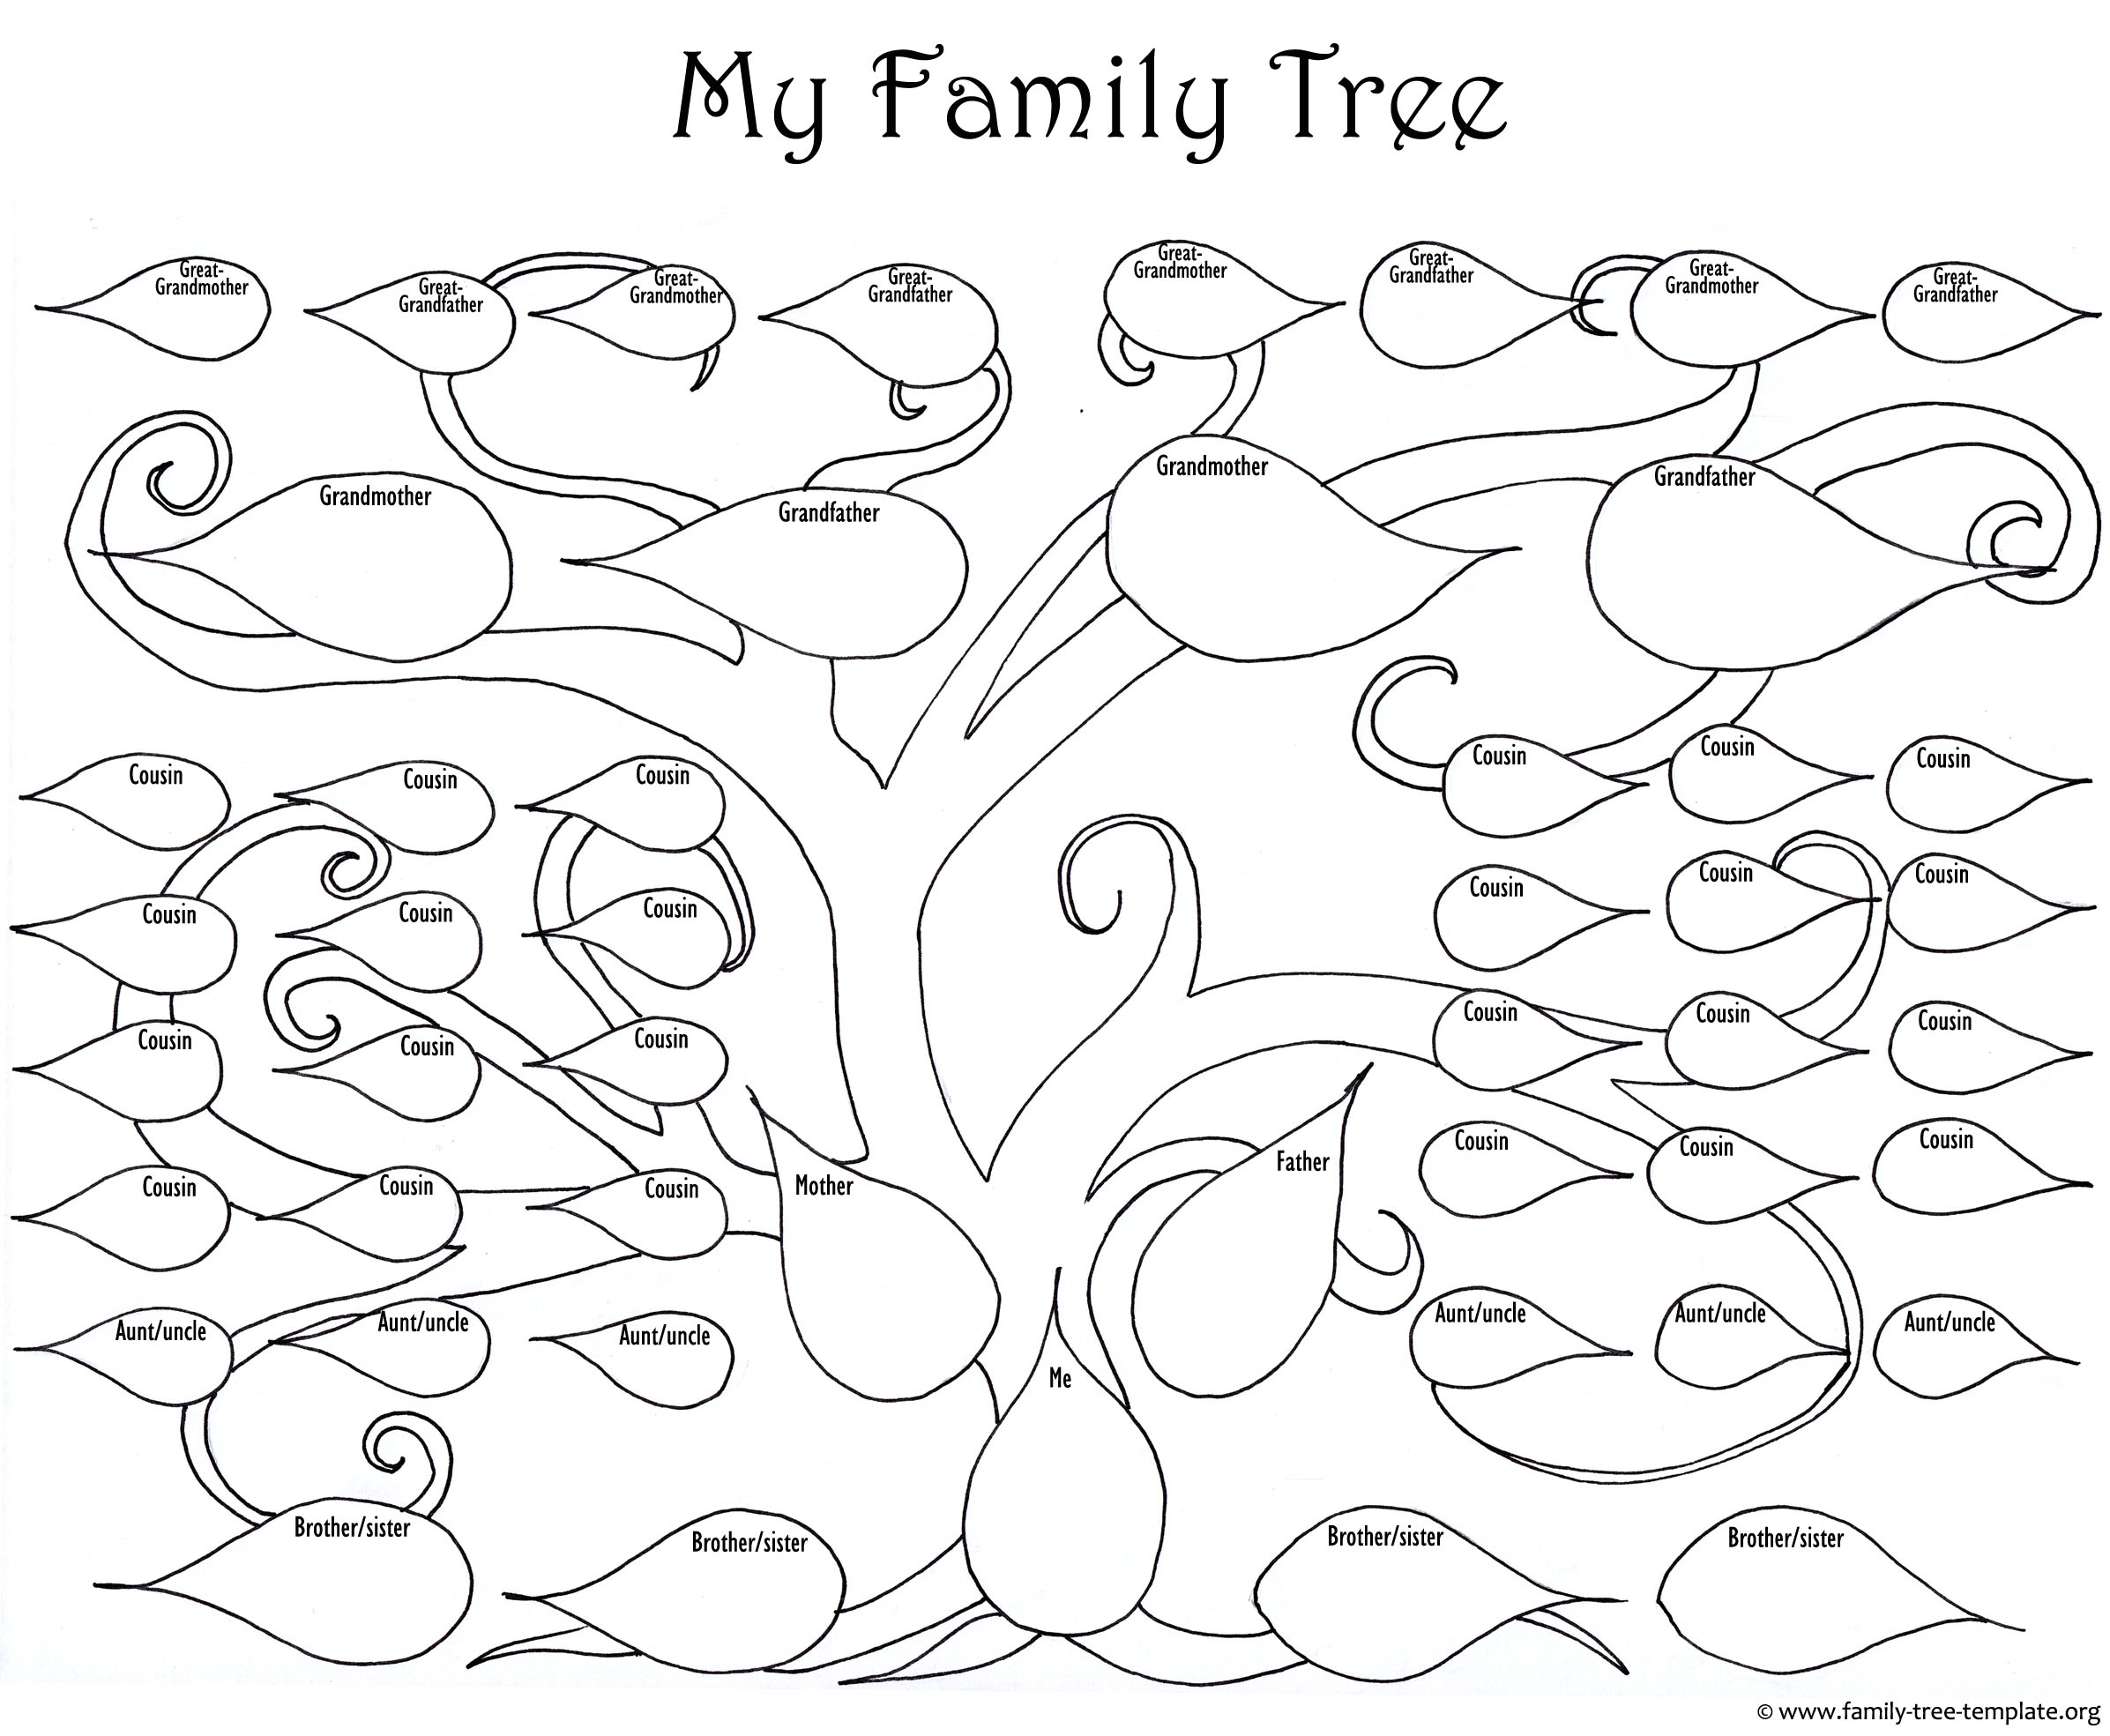 a-printable-blank-family-tree-to-make-your-kids-genealogy-chart